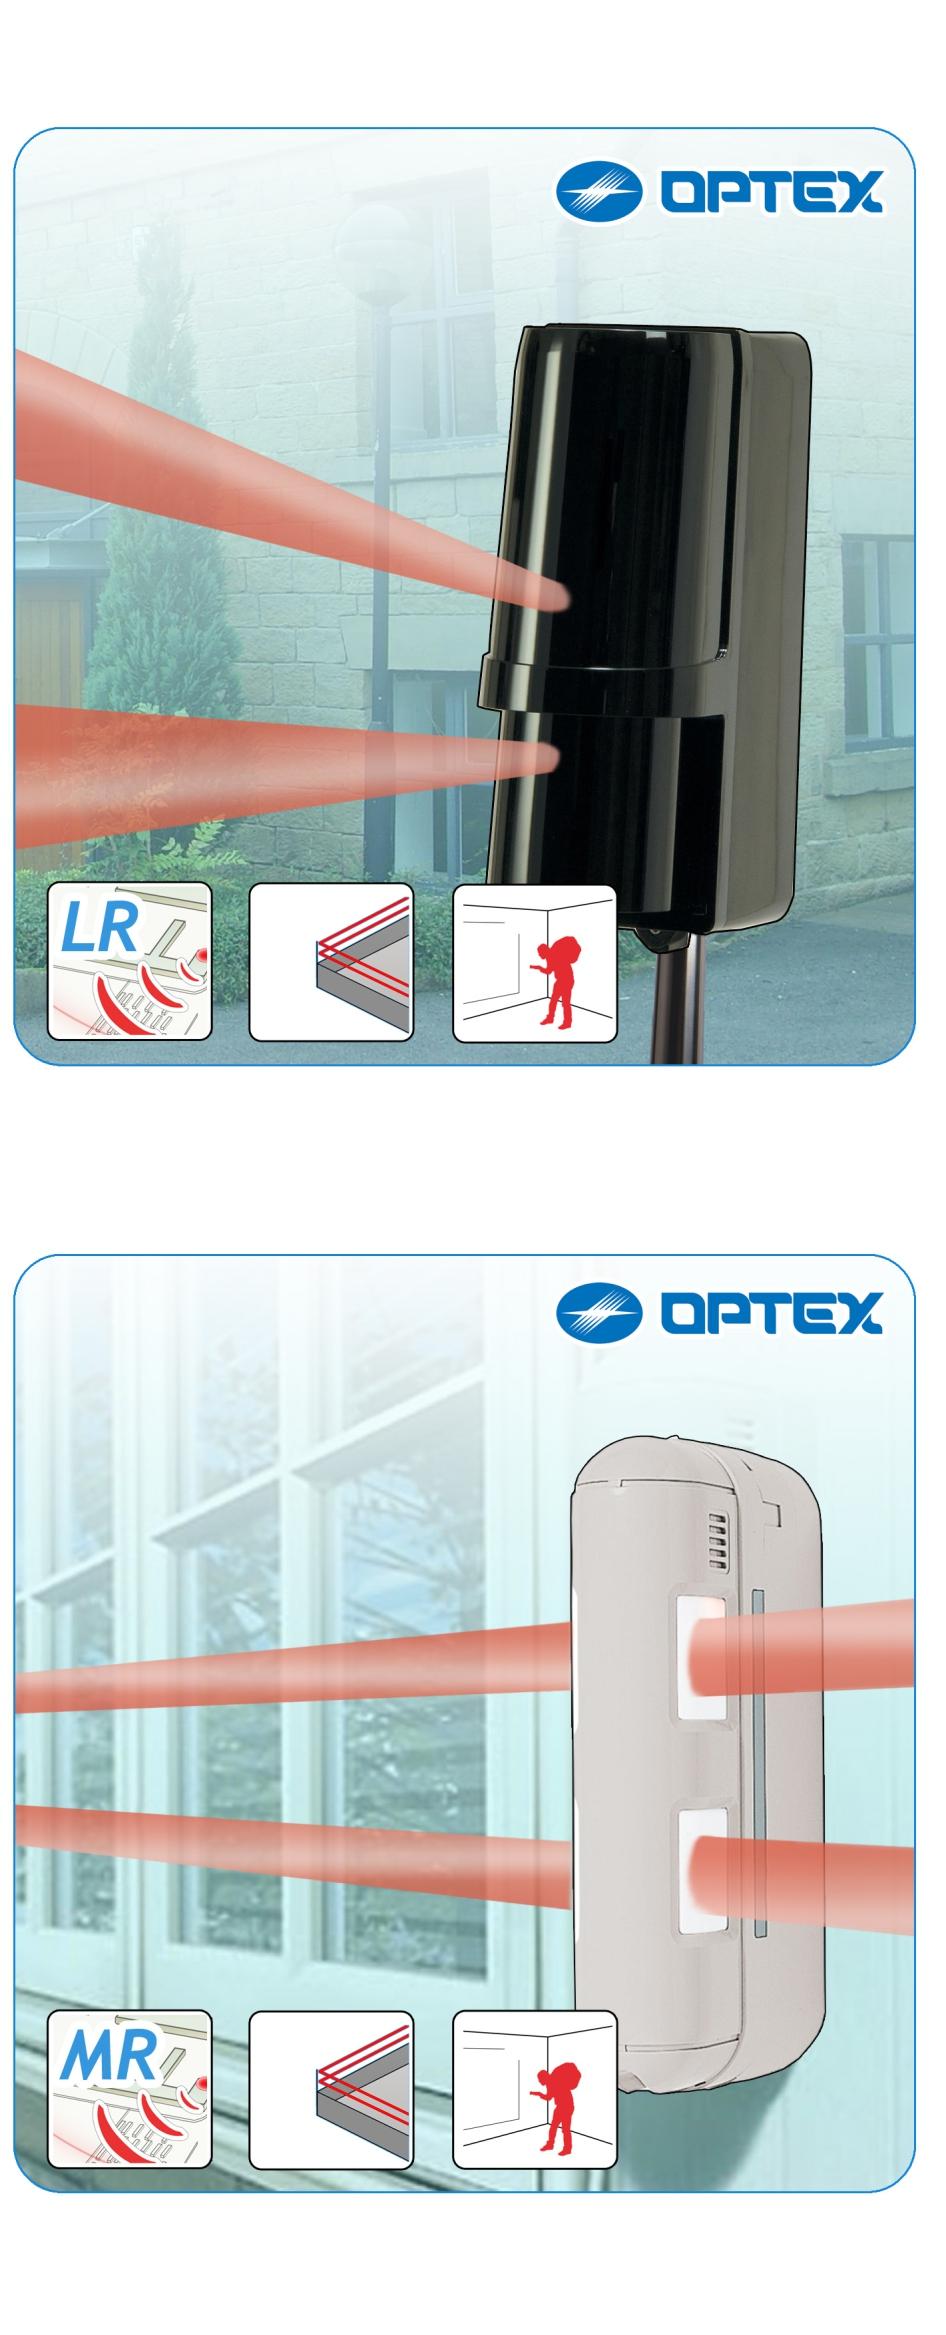 AX-100 External IR A revolution in the perimeter security industry, offering a signiﬁcant cost saving to a traditional hardwired system. No trenching required, drastically reducing installation costs.